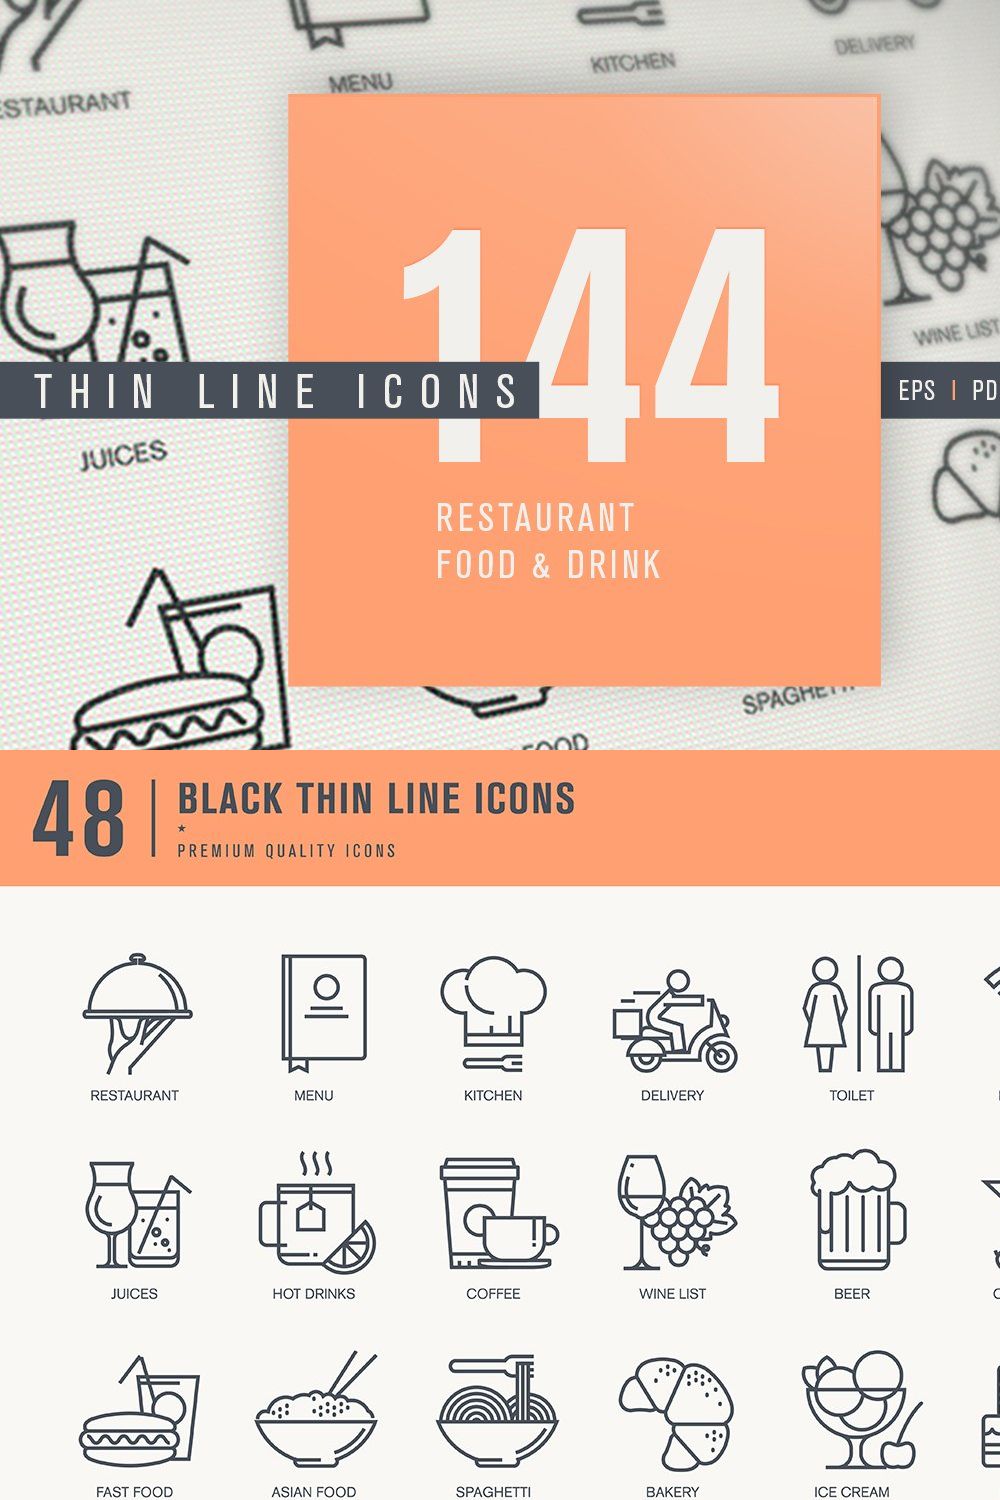 Restaurant, Food & Drink icons pinterest preview image.